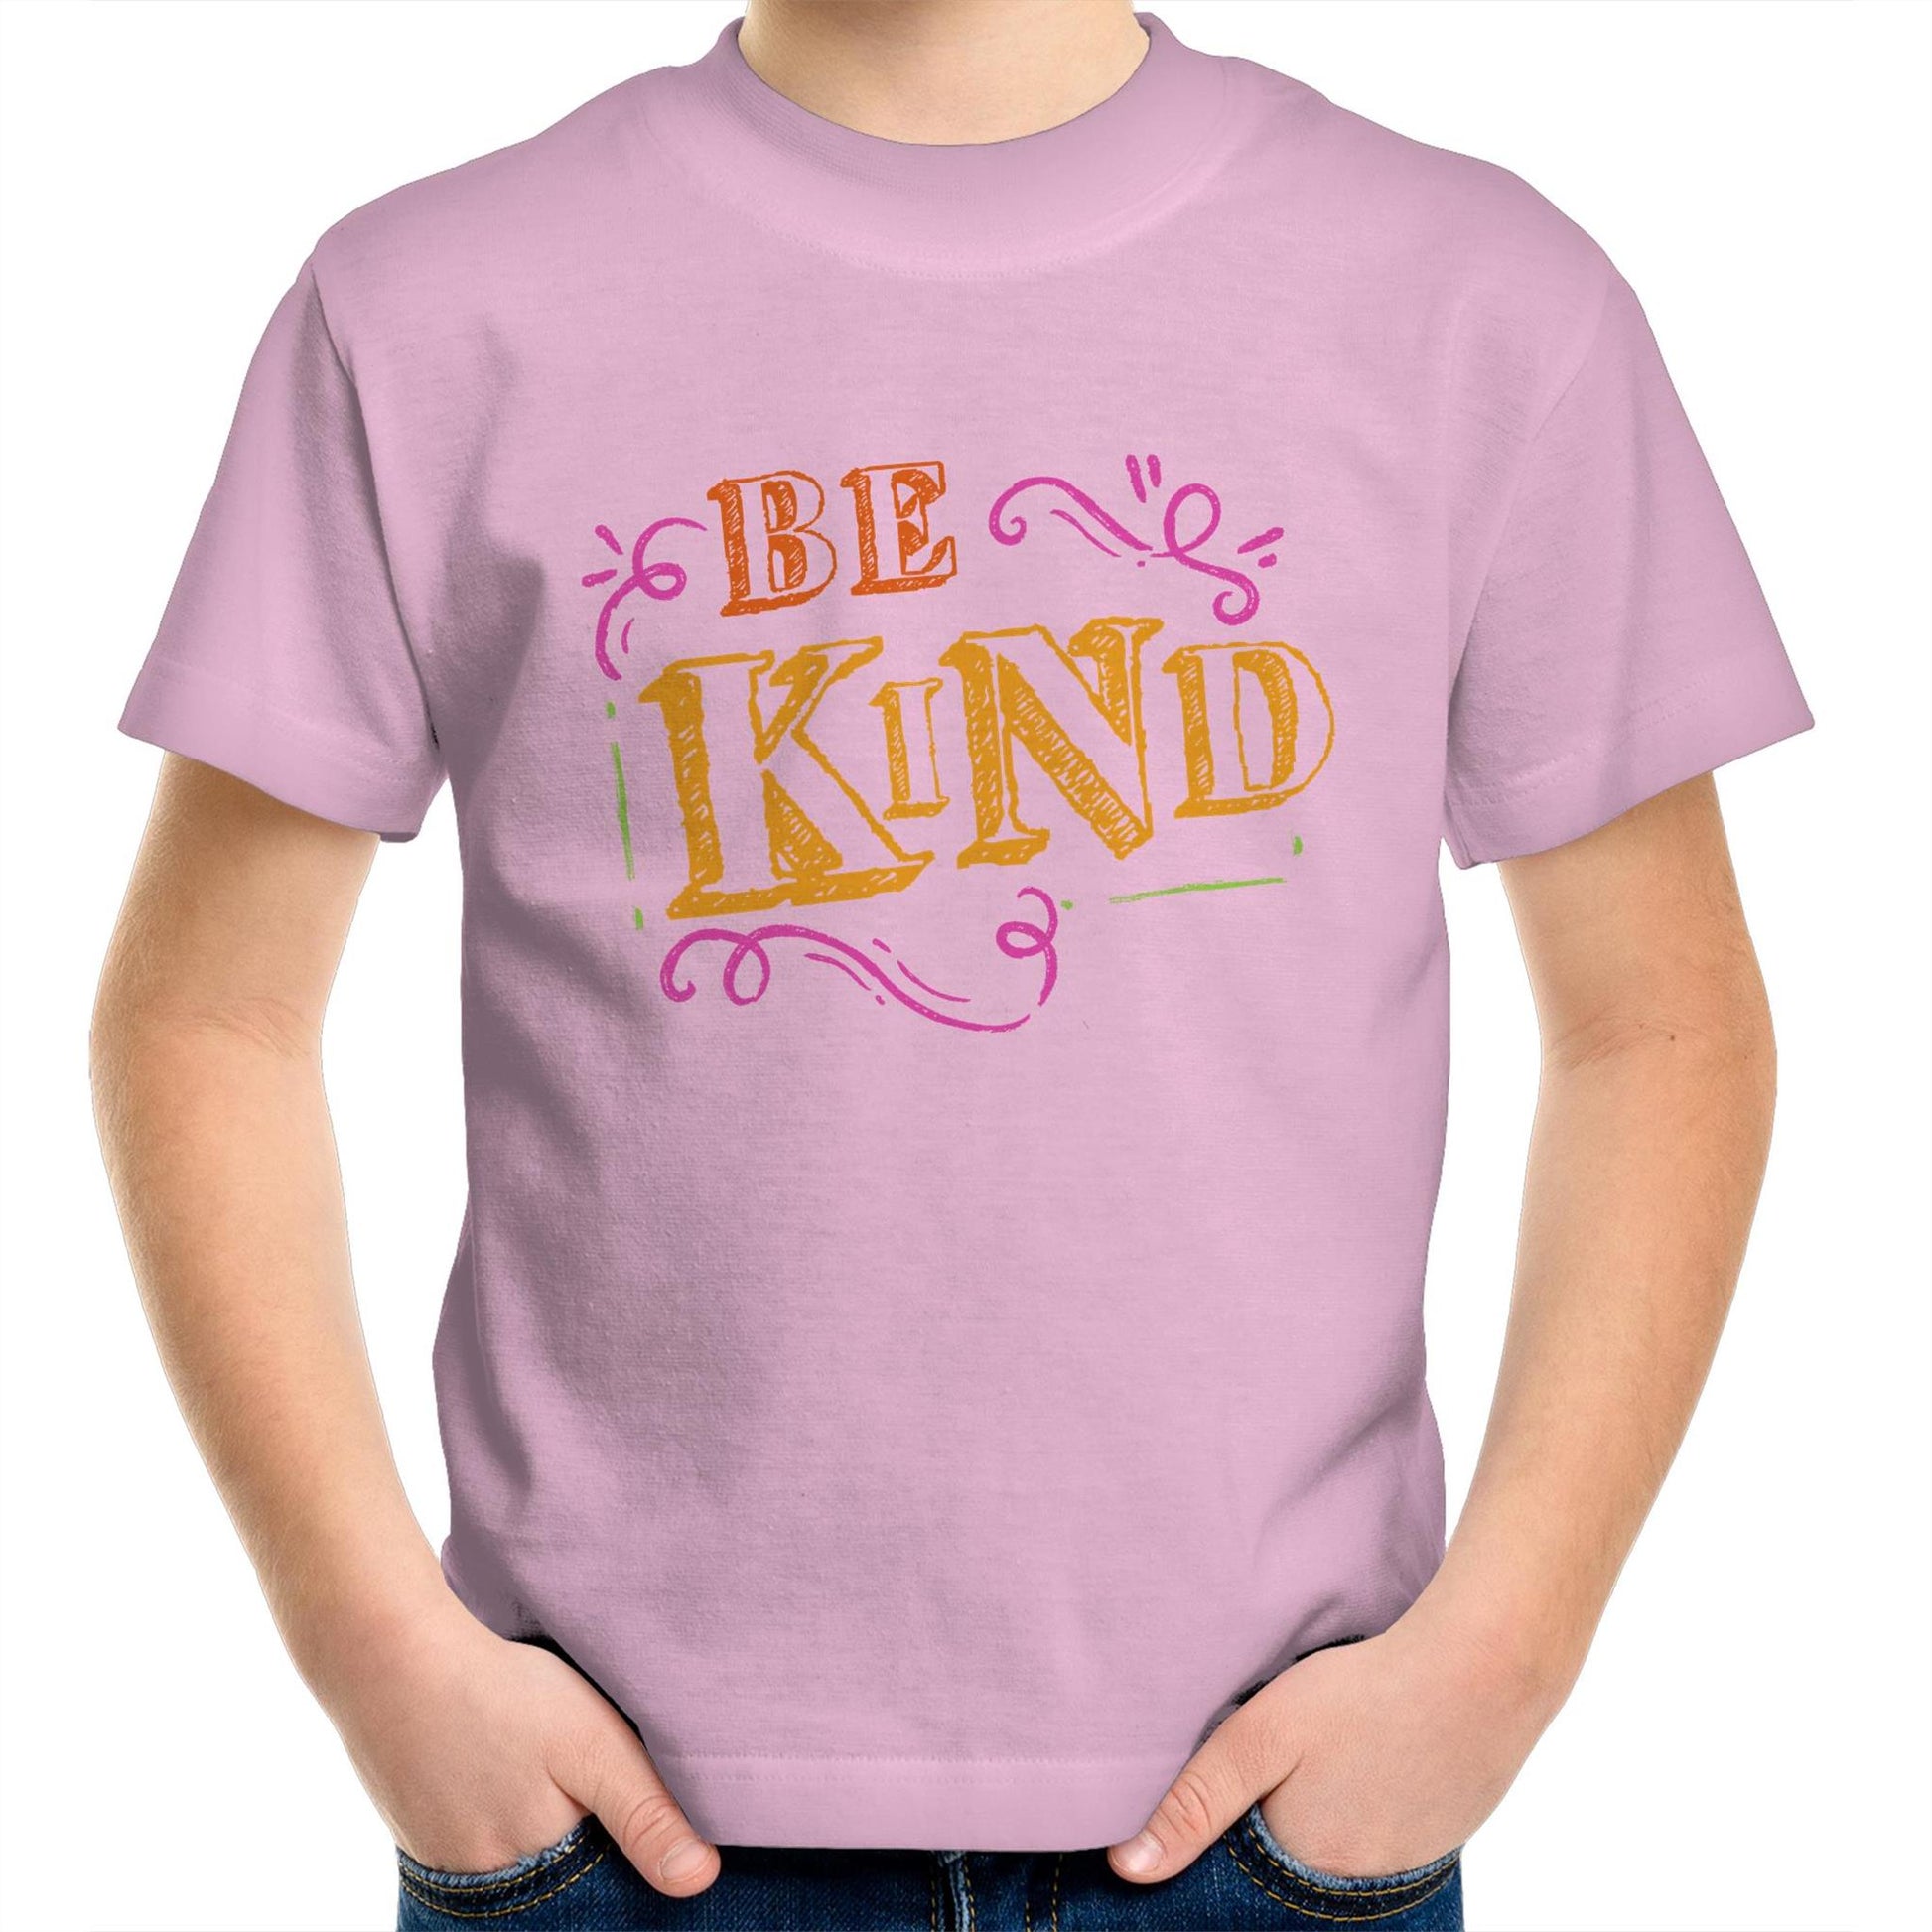 Be Kind - Kids Youth Crew T-Shirt Pink Kids Youth T-shirt